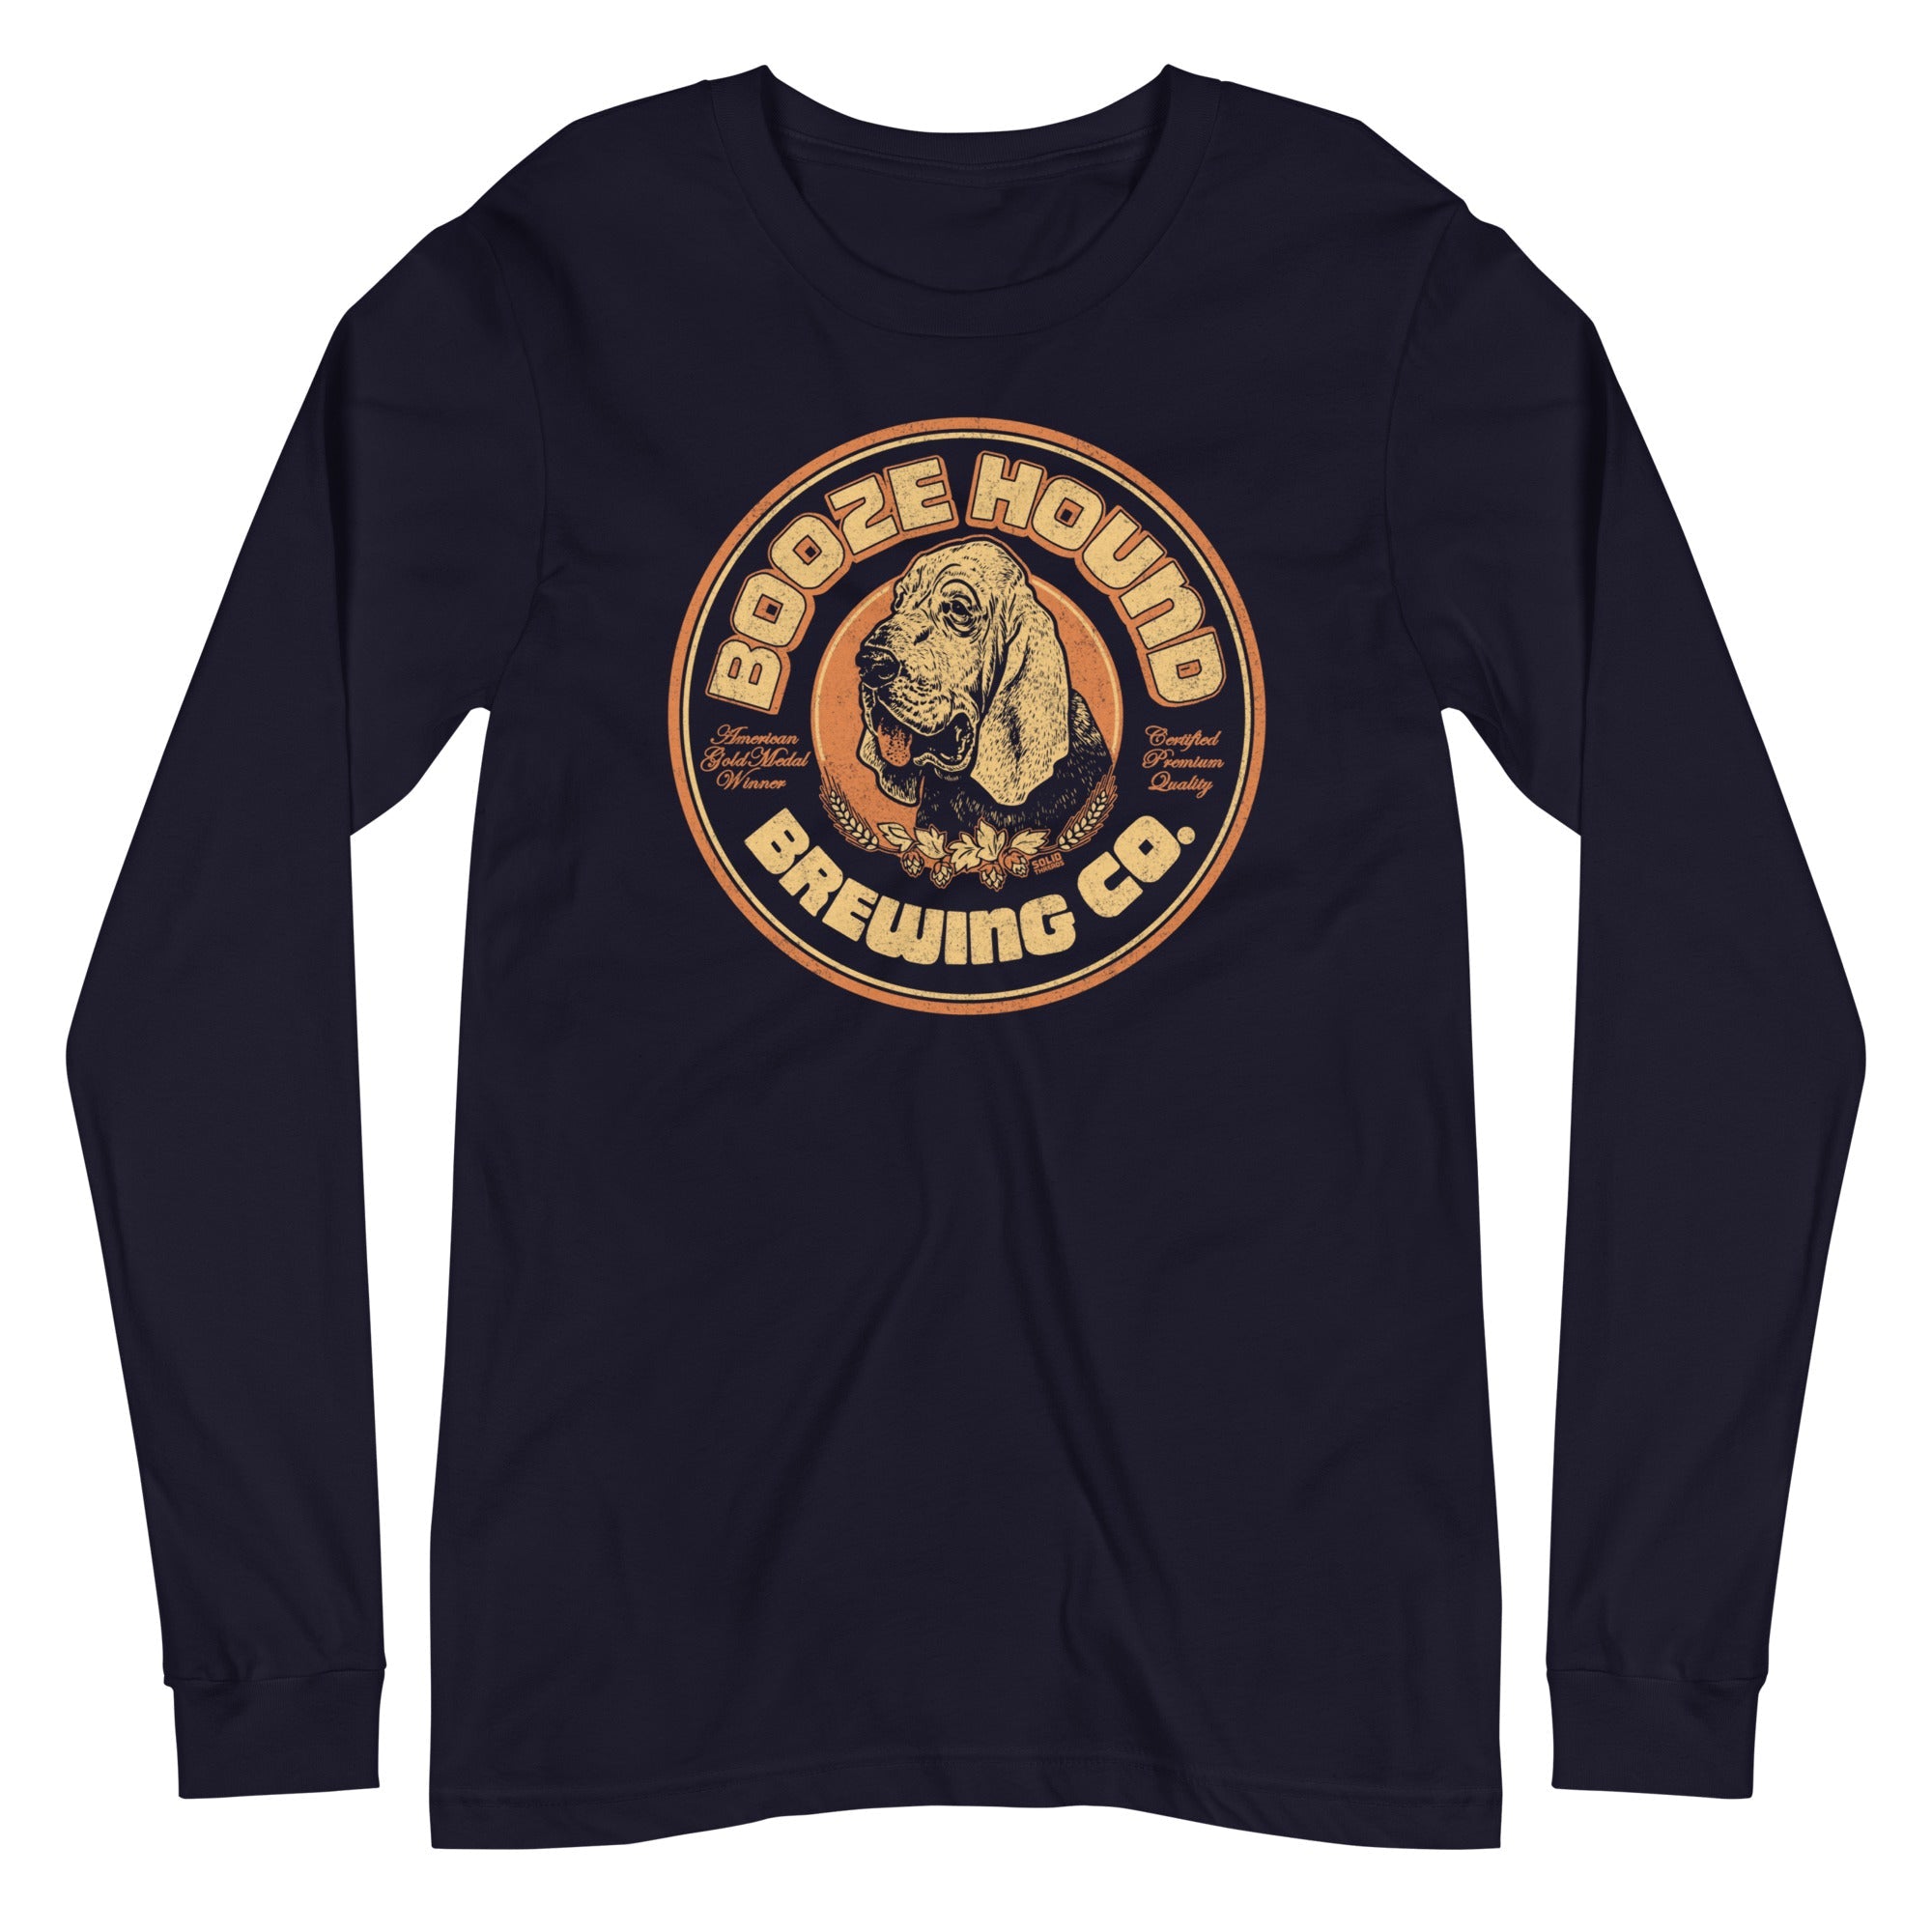 Boozehound Brewing Co. Vintage Graphic Long Sleeve Tee | Retro Drinking T-Shirt - Solid Threads